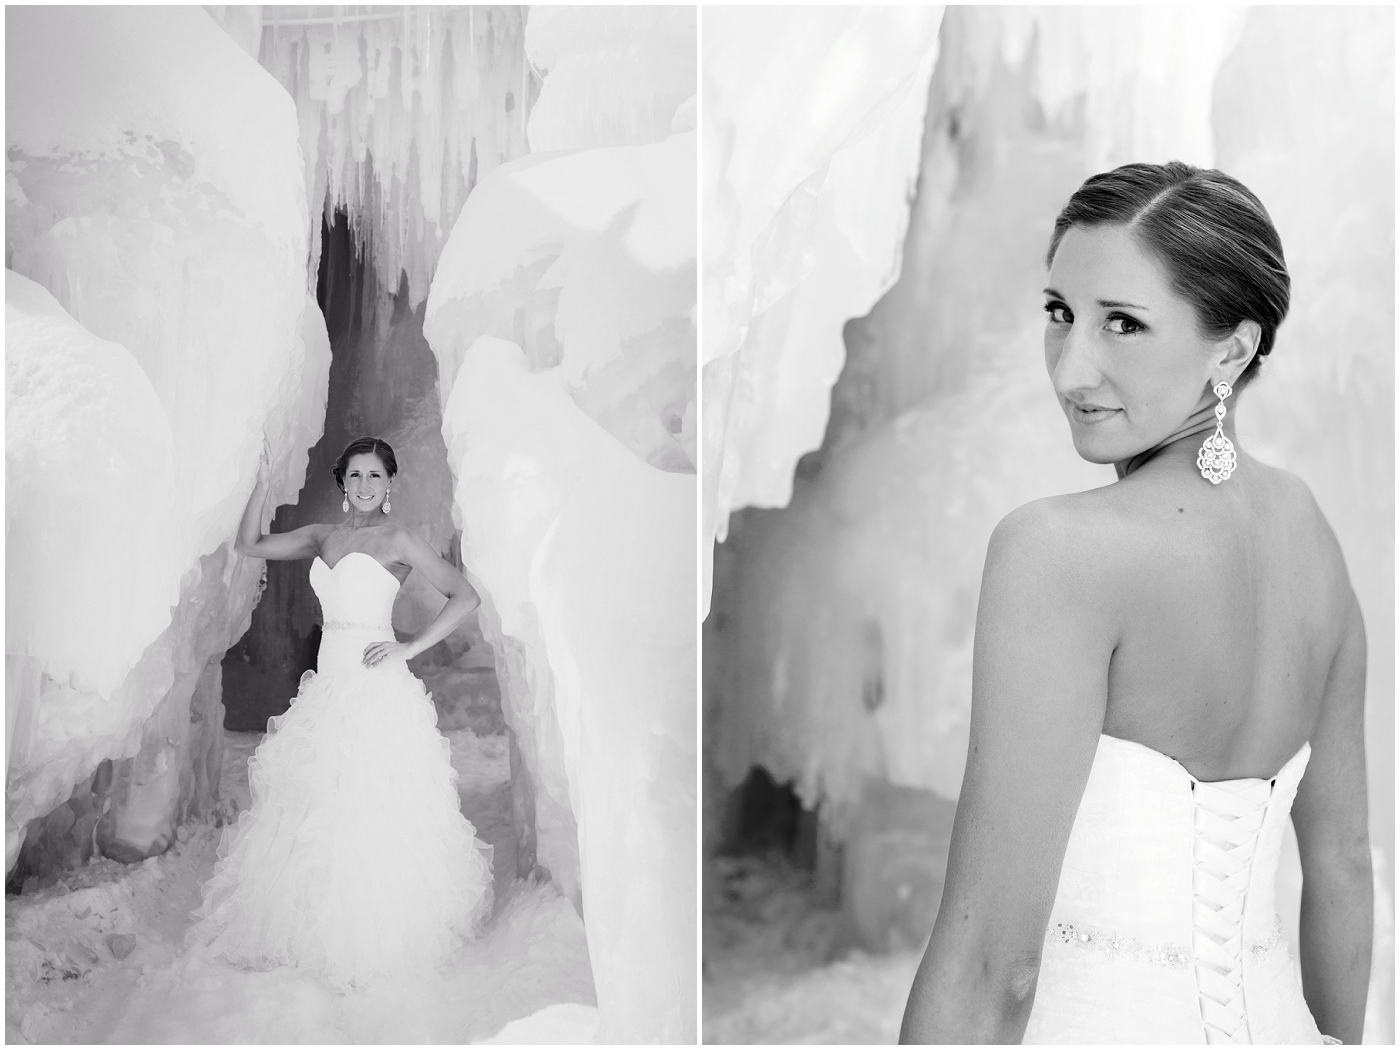 picture of winter bridal portraits at ice castles